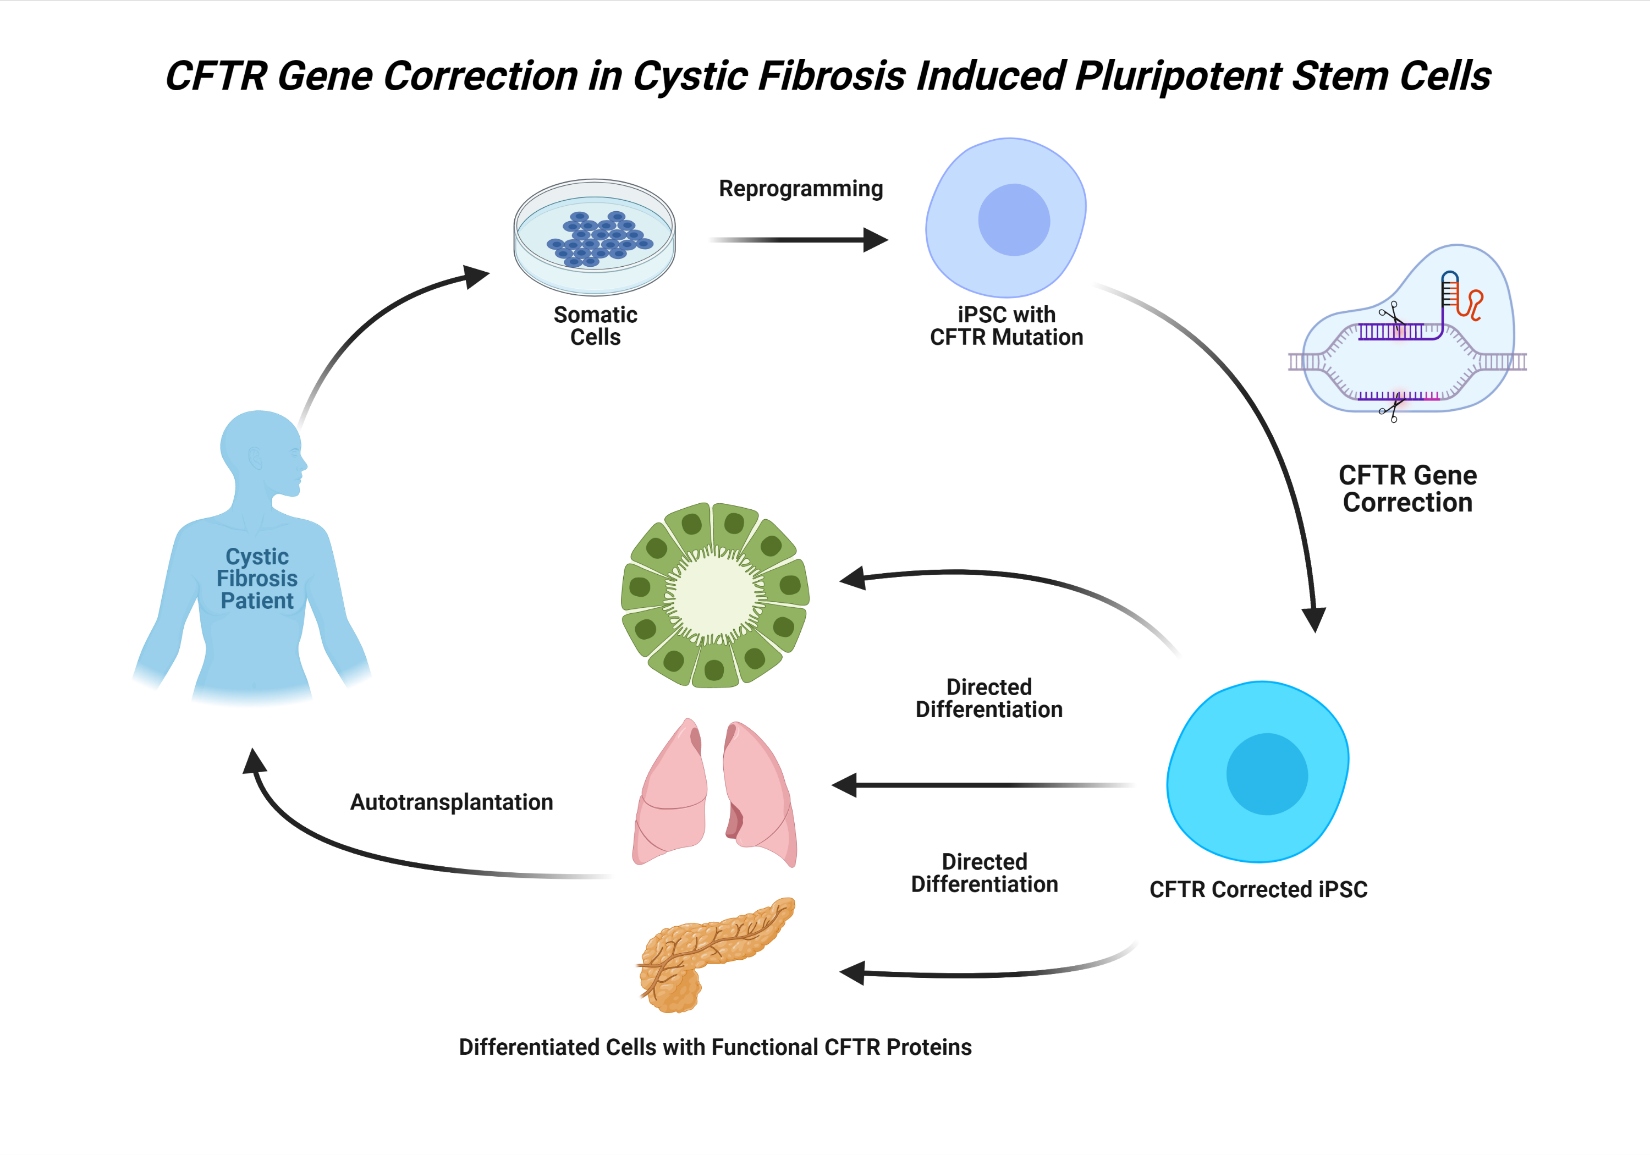 curative-measures-for-cystic-fibrosis-a-perspective-on-current-stem